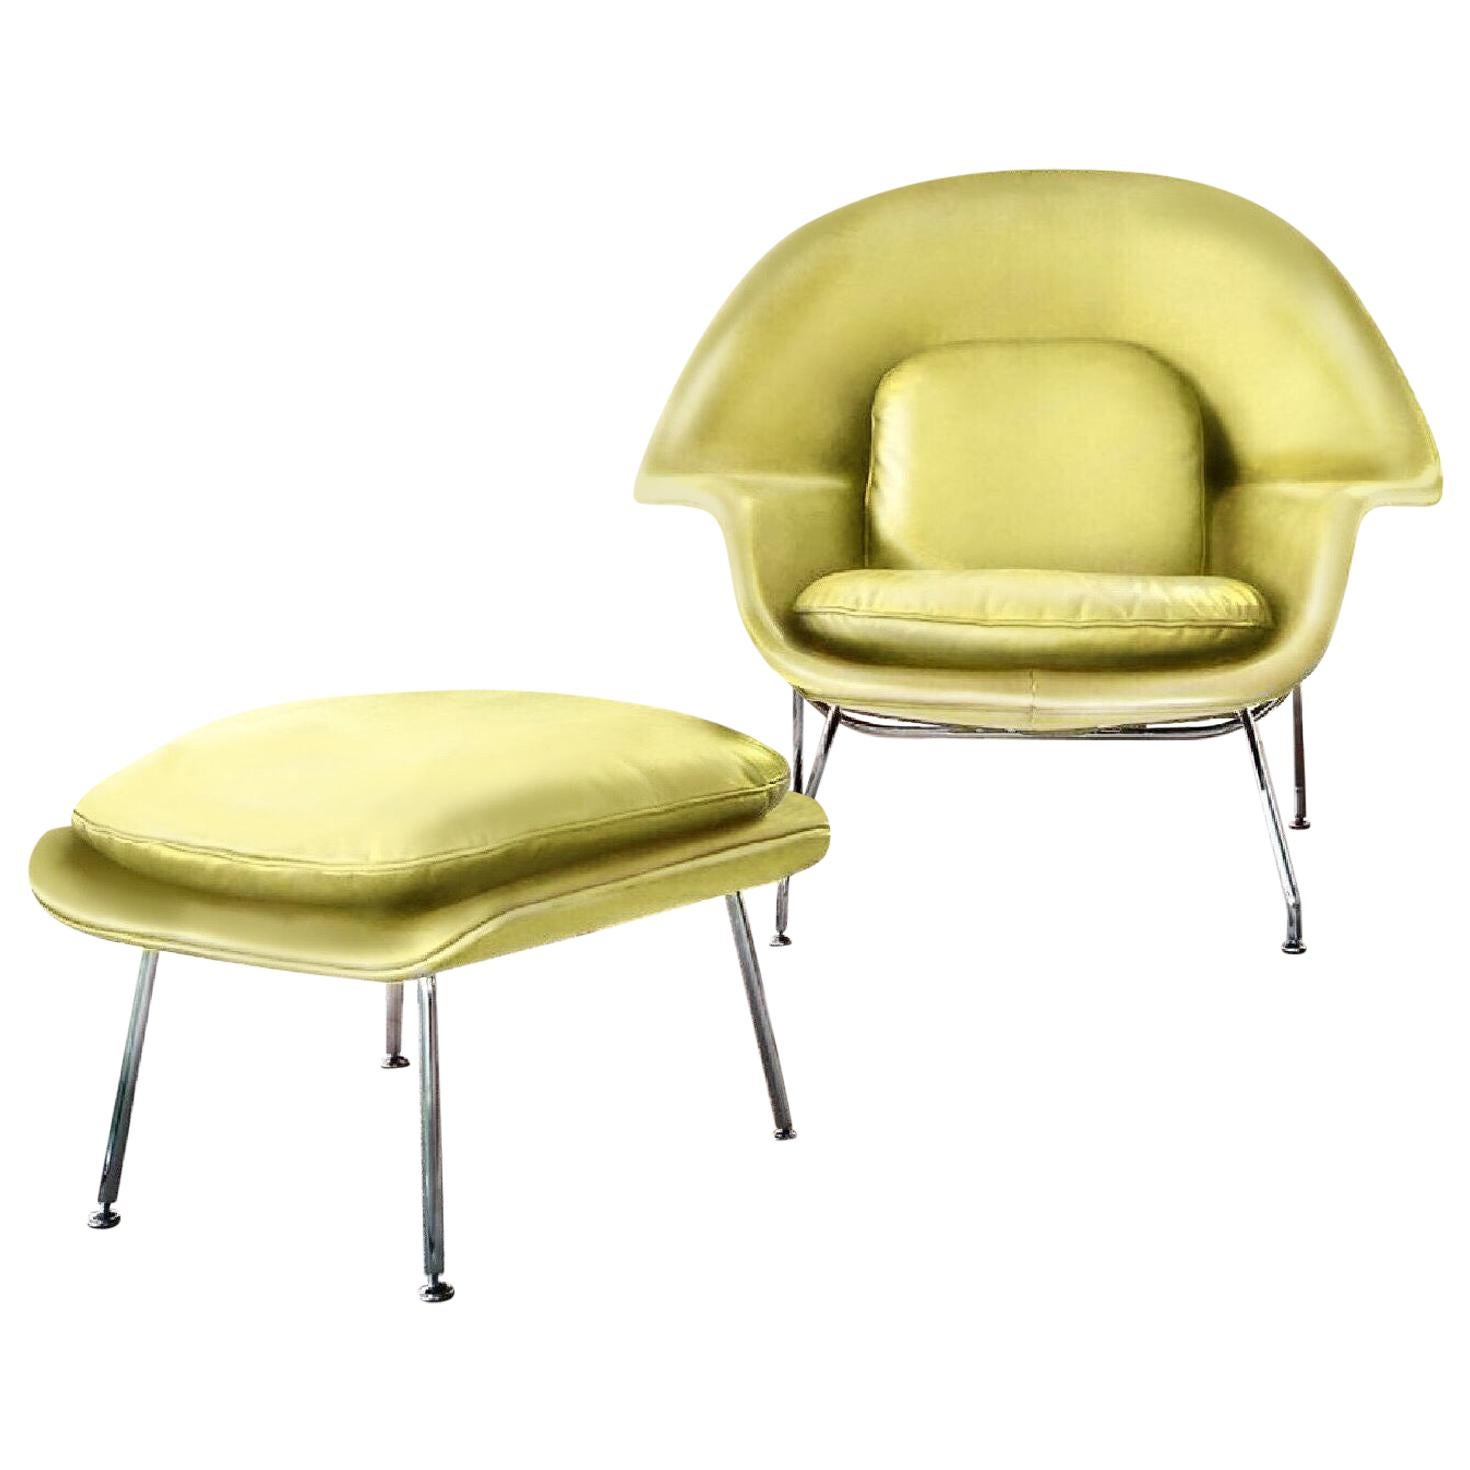 Eero Saarinen for Knoll Womb Chair and Ottoman, Leather, Chartreuse Green-Yellow